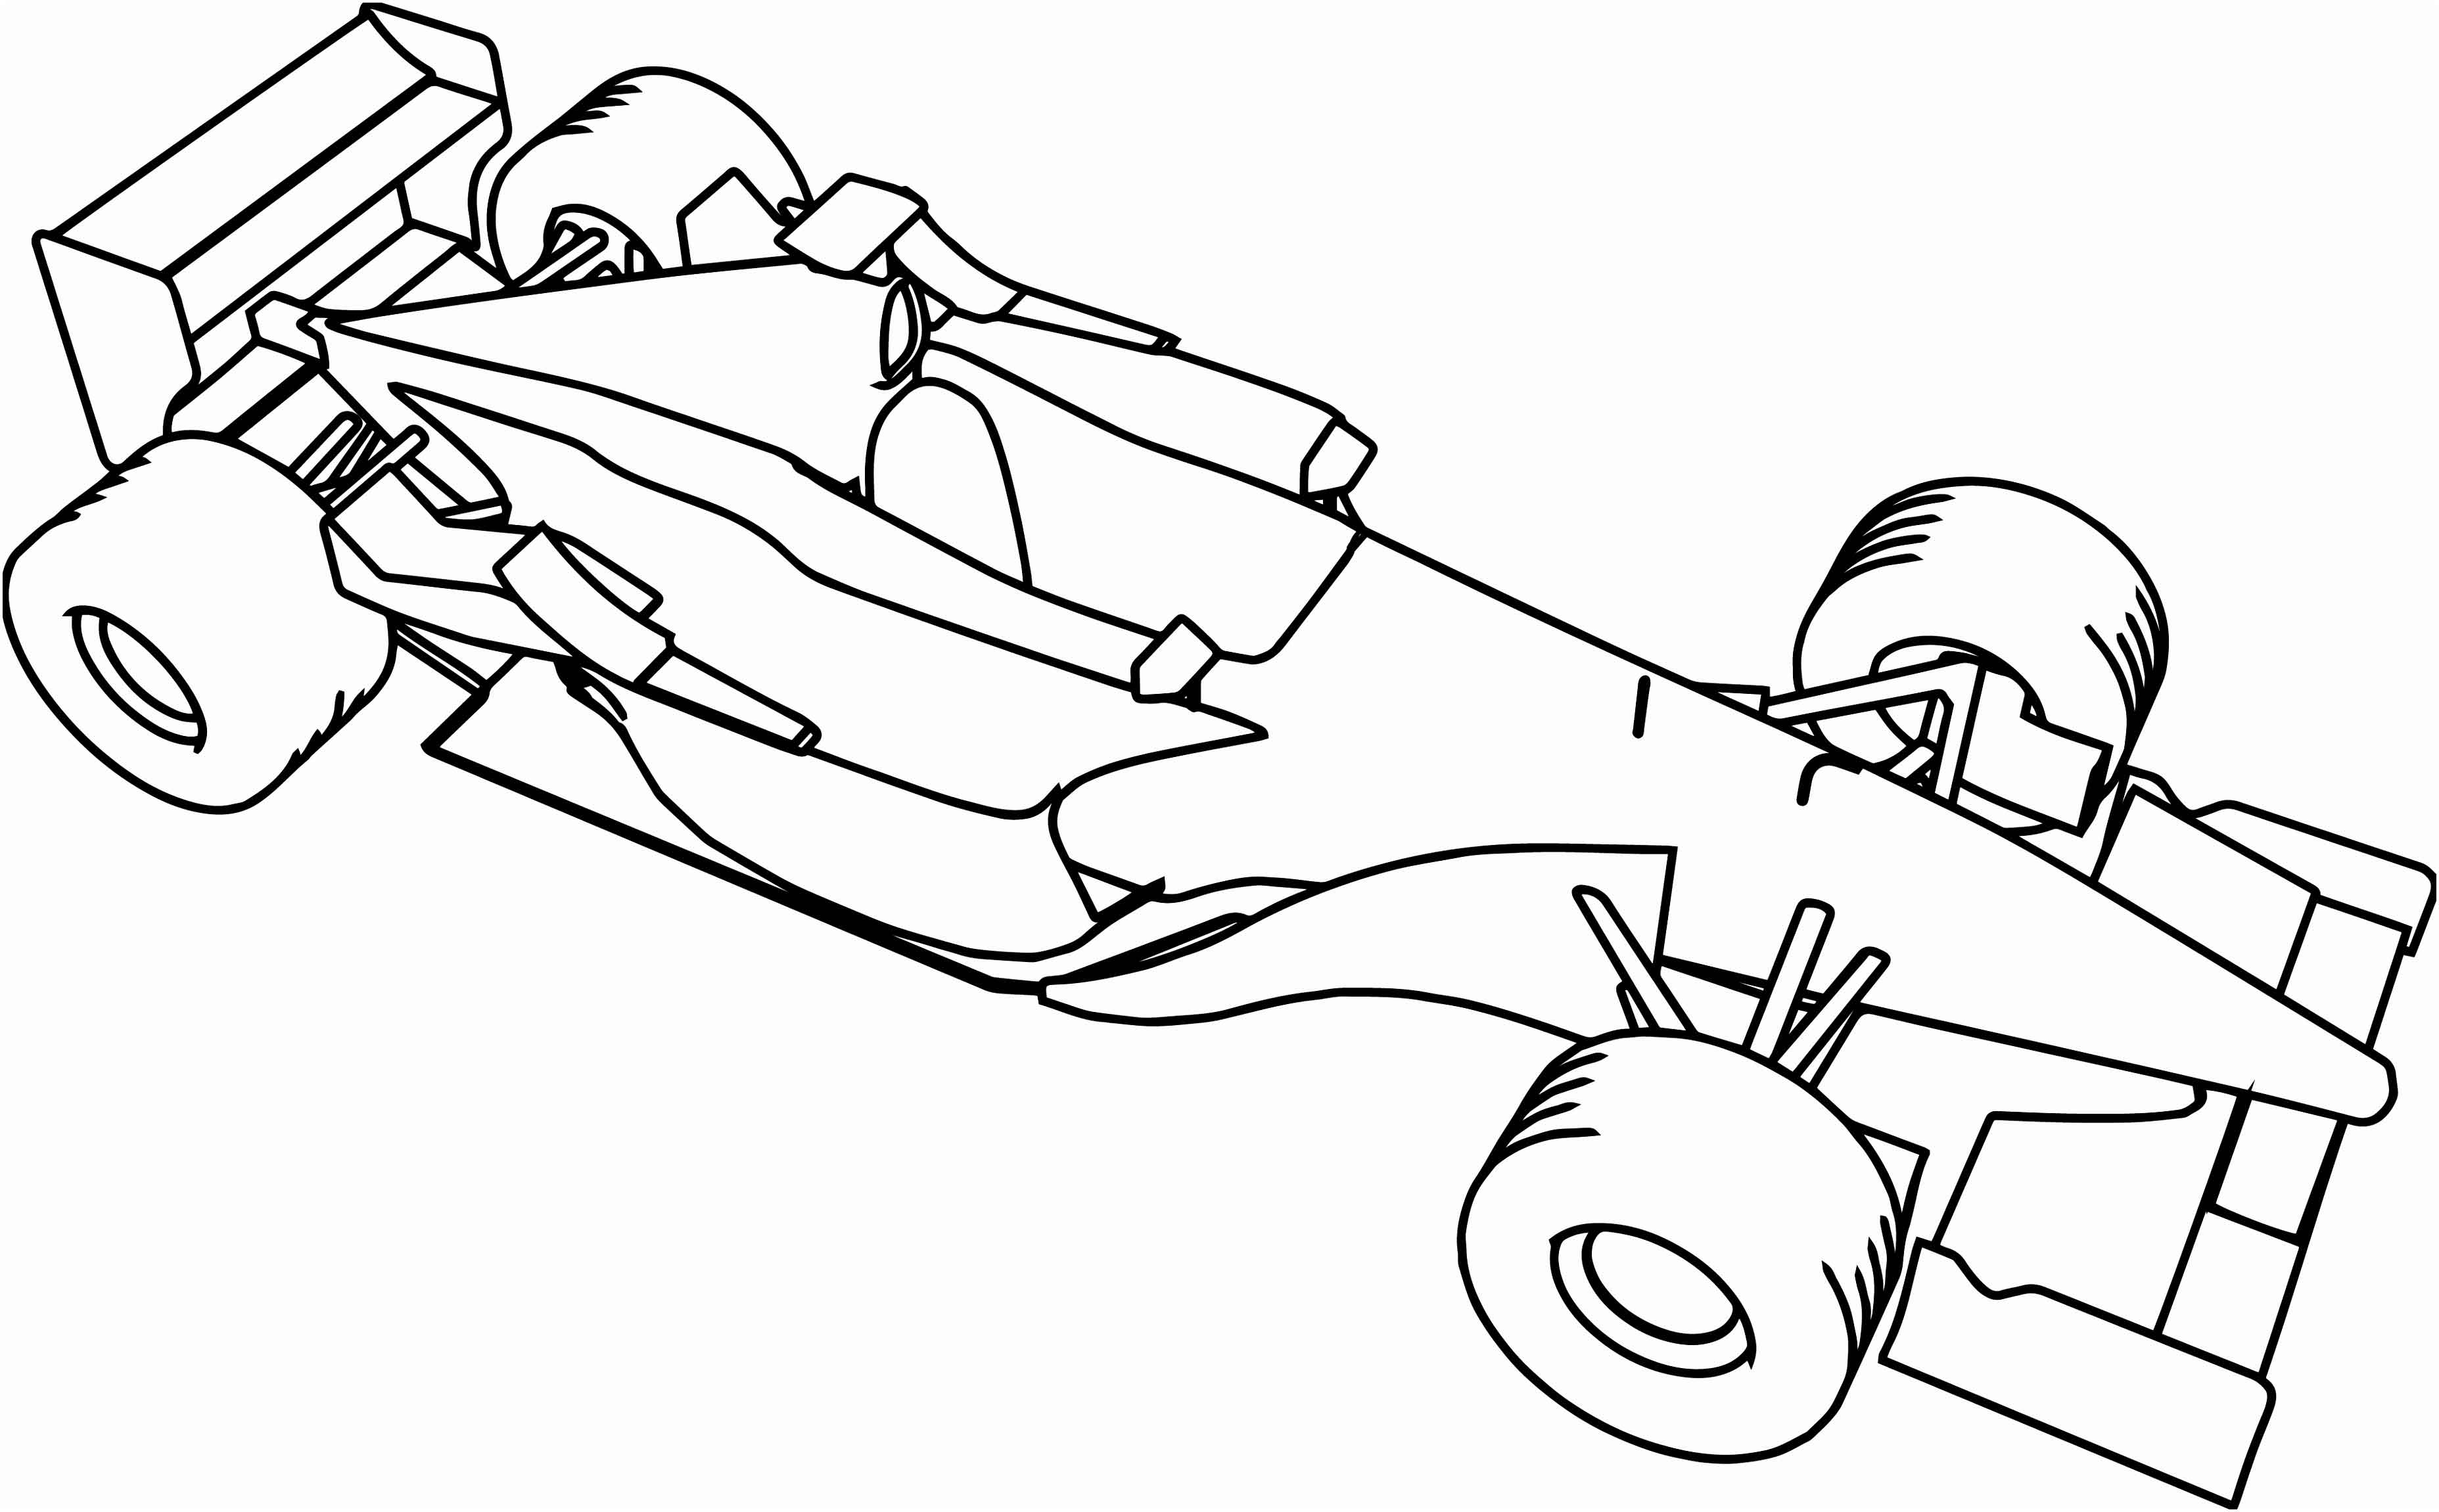 Formula 1 Race Cars Coloring Page To Print For Adults Coloring Home